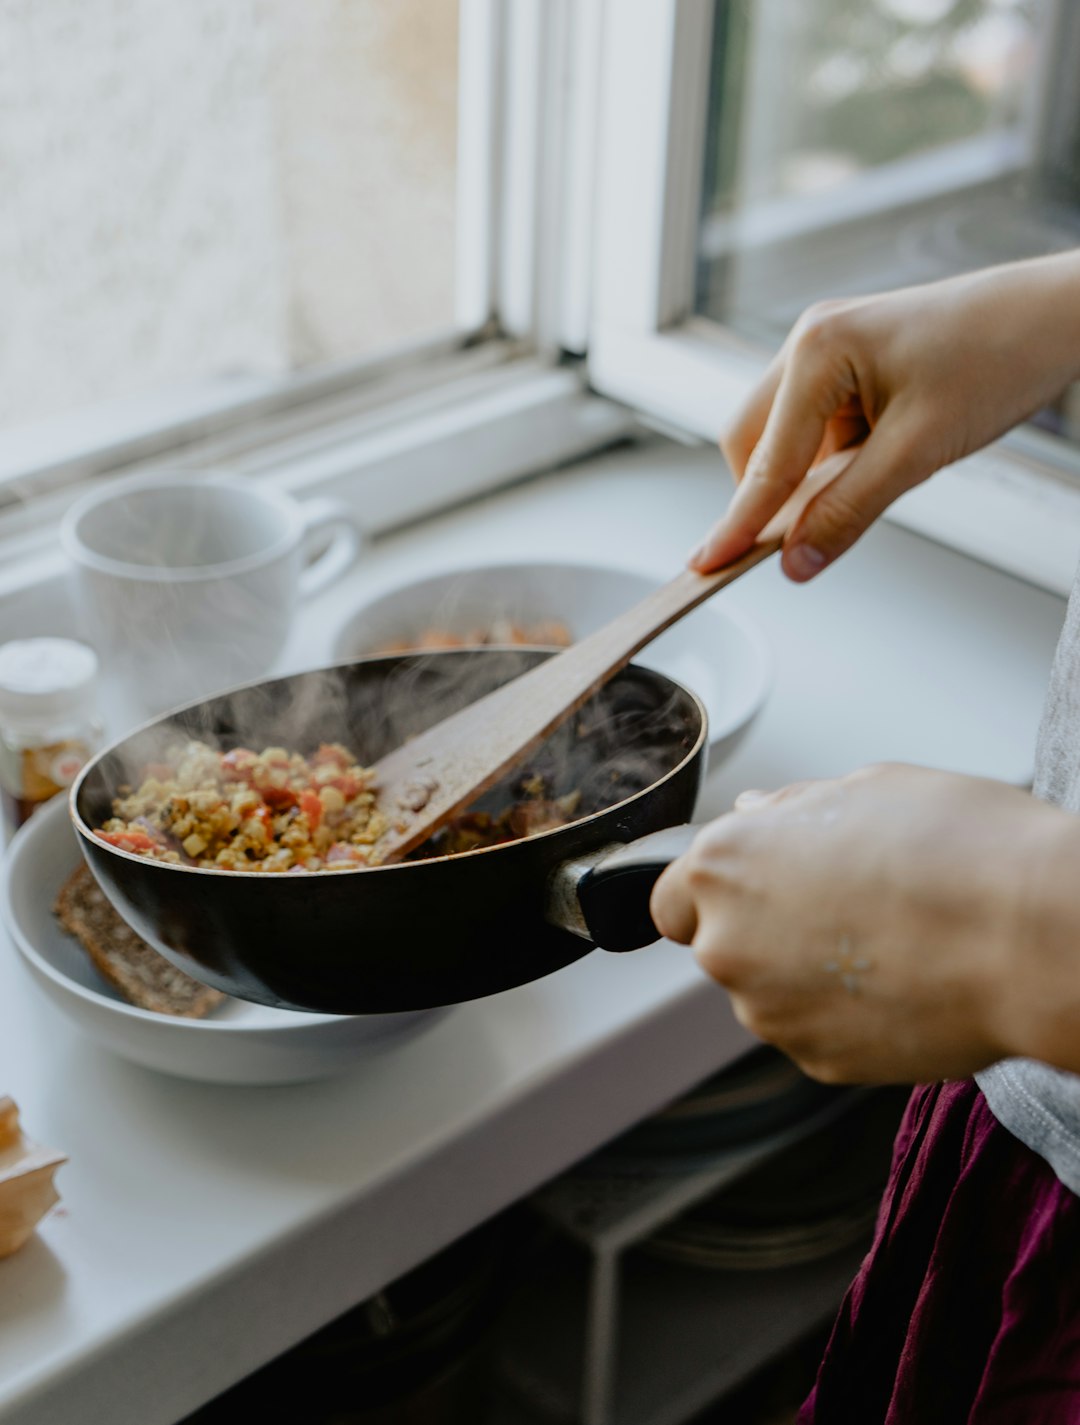 person holding black frying pan serving food into a bowl.